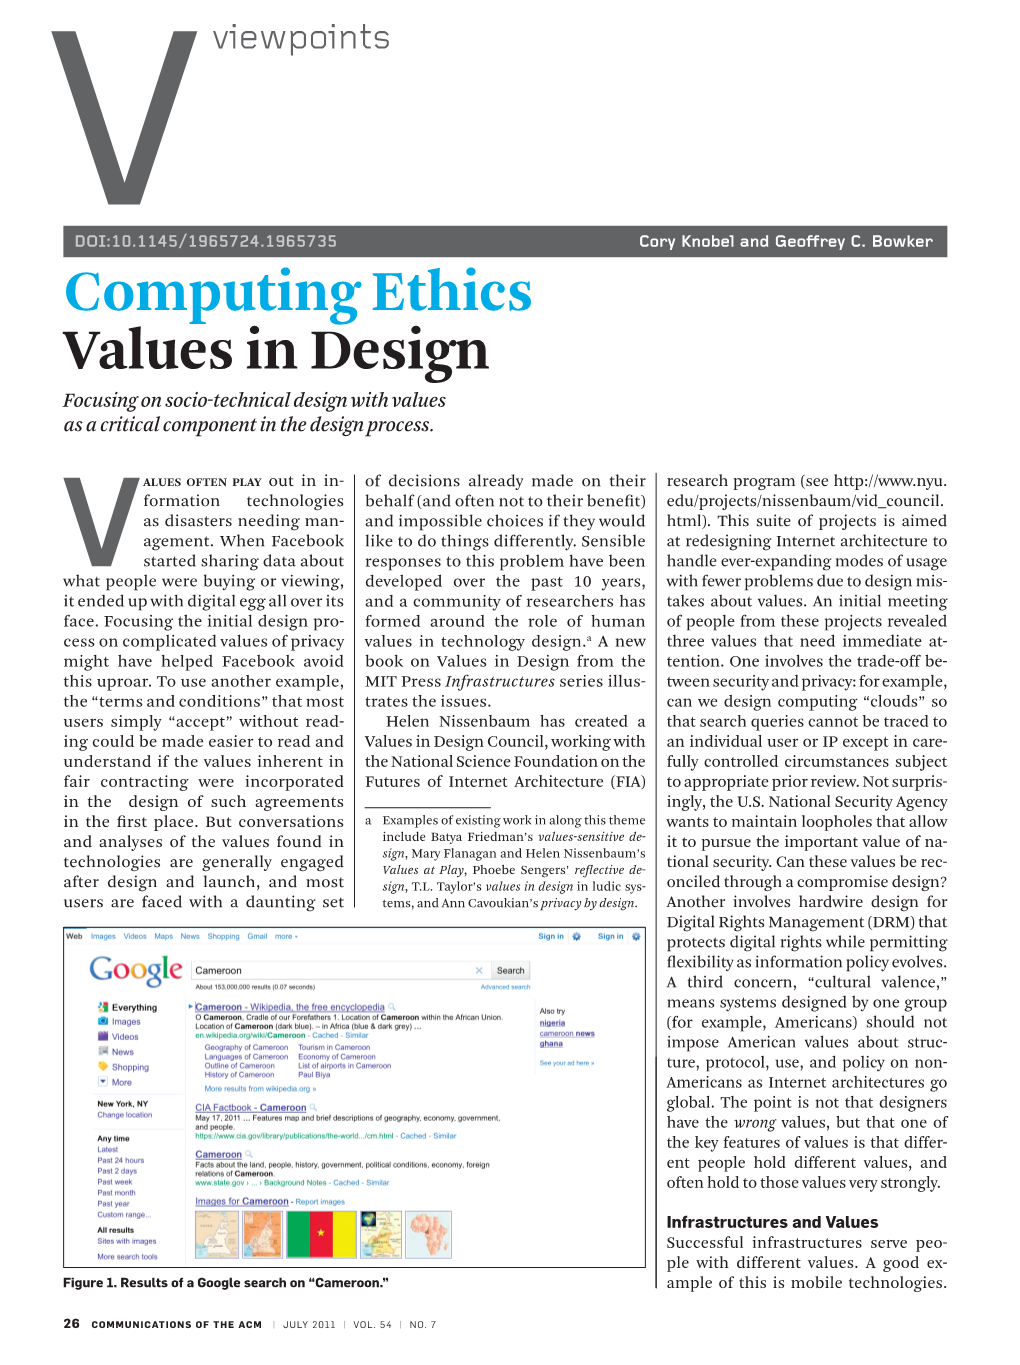 Values in Design Focusing on Socio-Technical Design with Values As a Critical Component in the Design Process